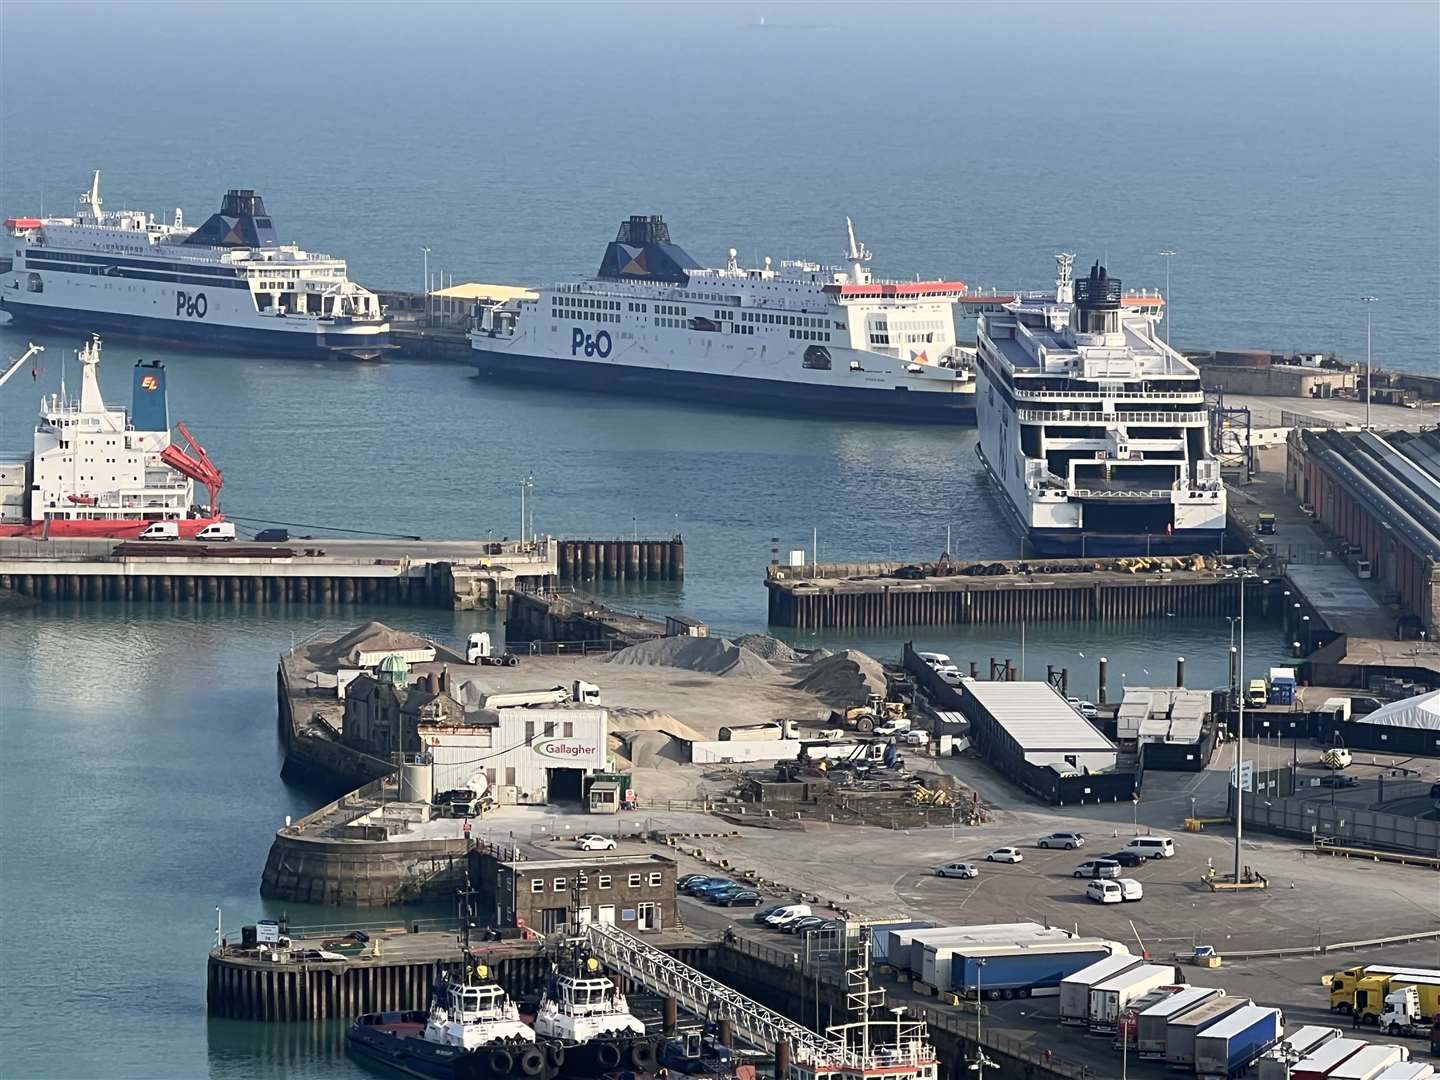 P&O ships serving Dover have been out of action and berthed since the dismissals on March 17. Picture: Barry Goodwin